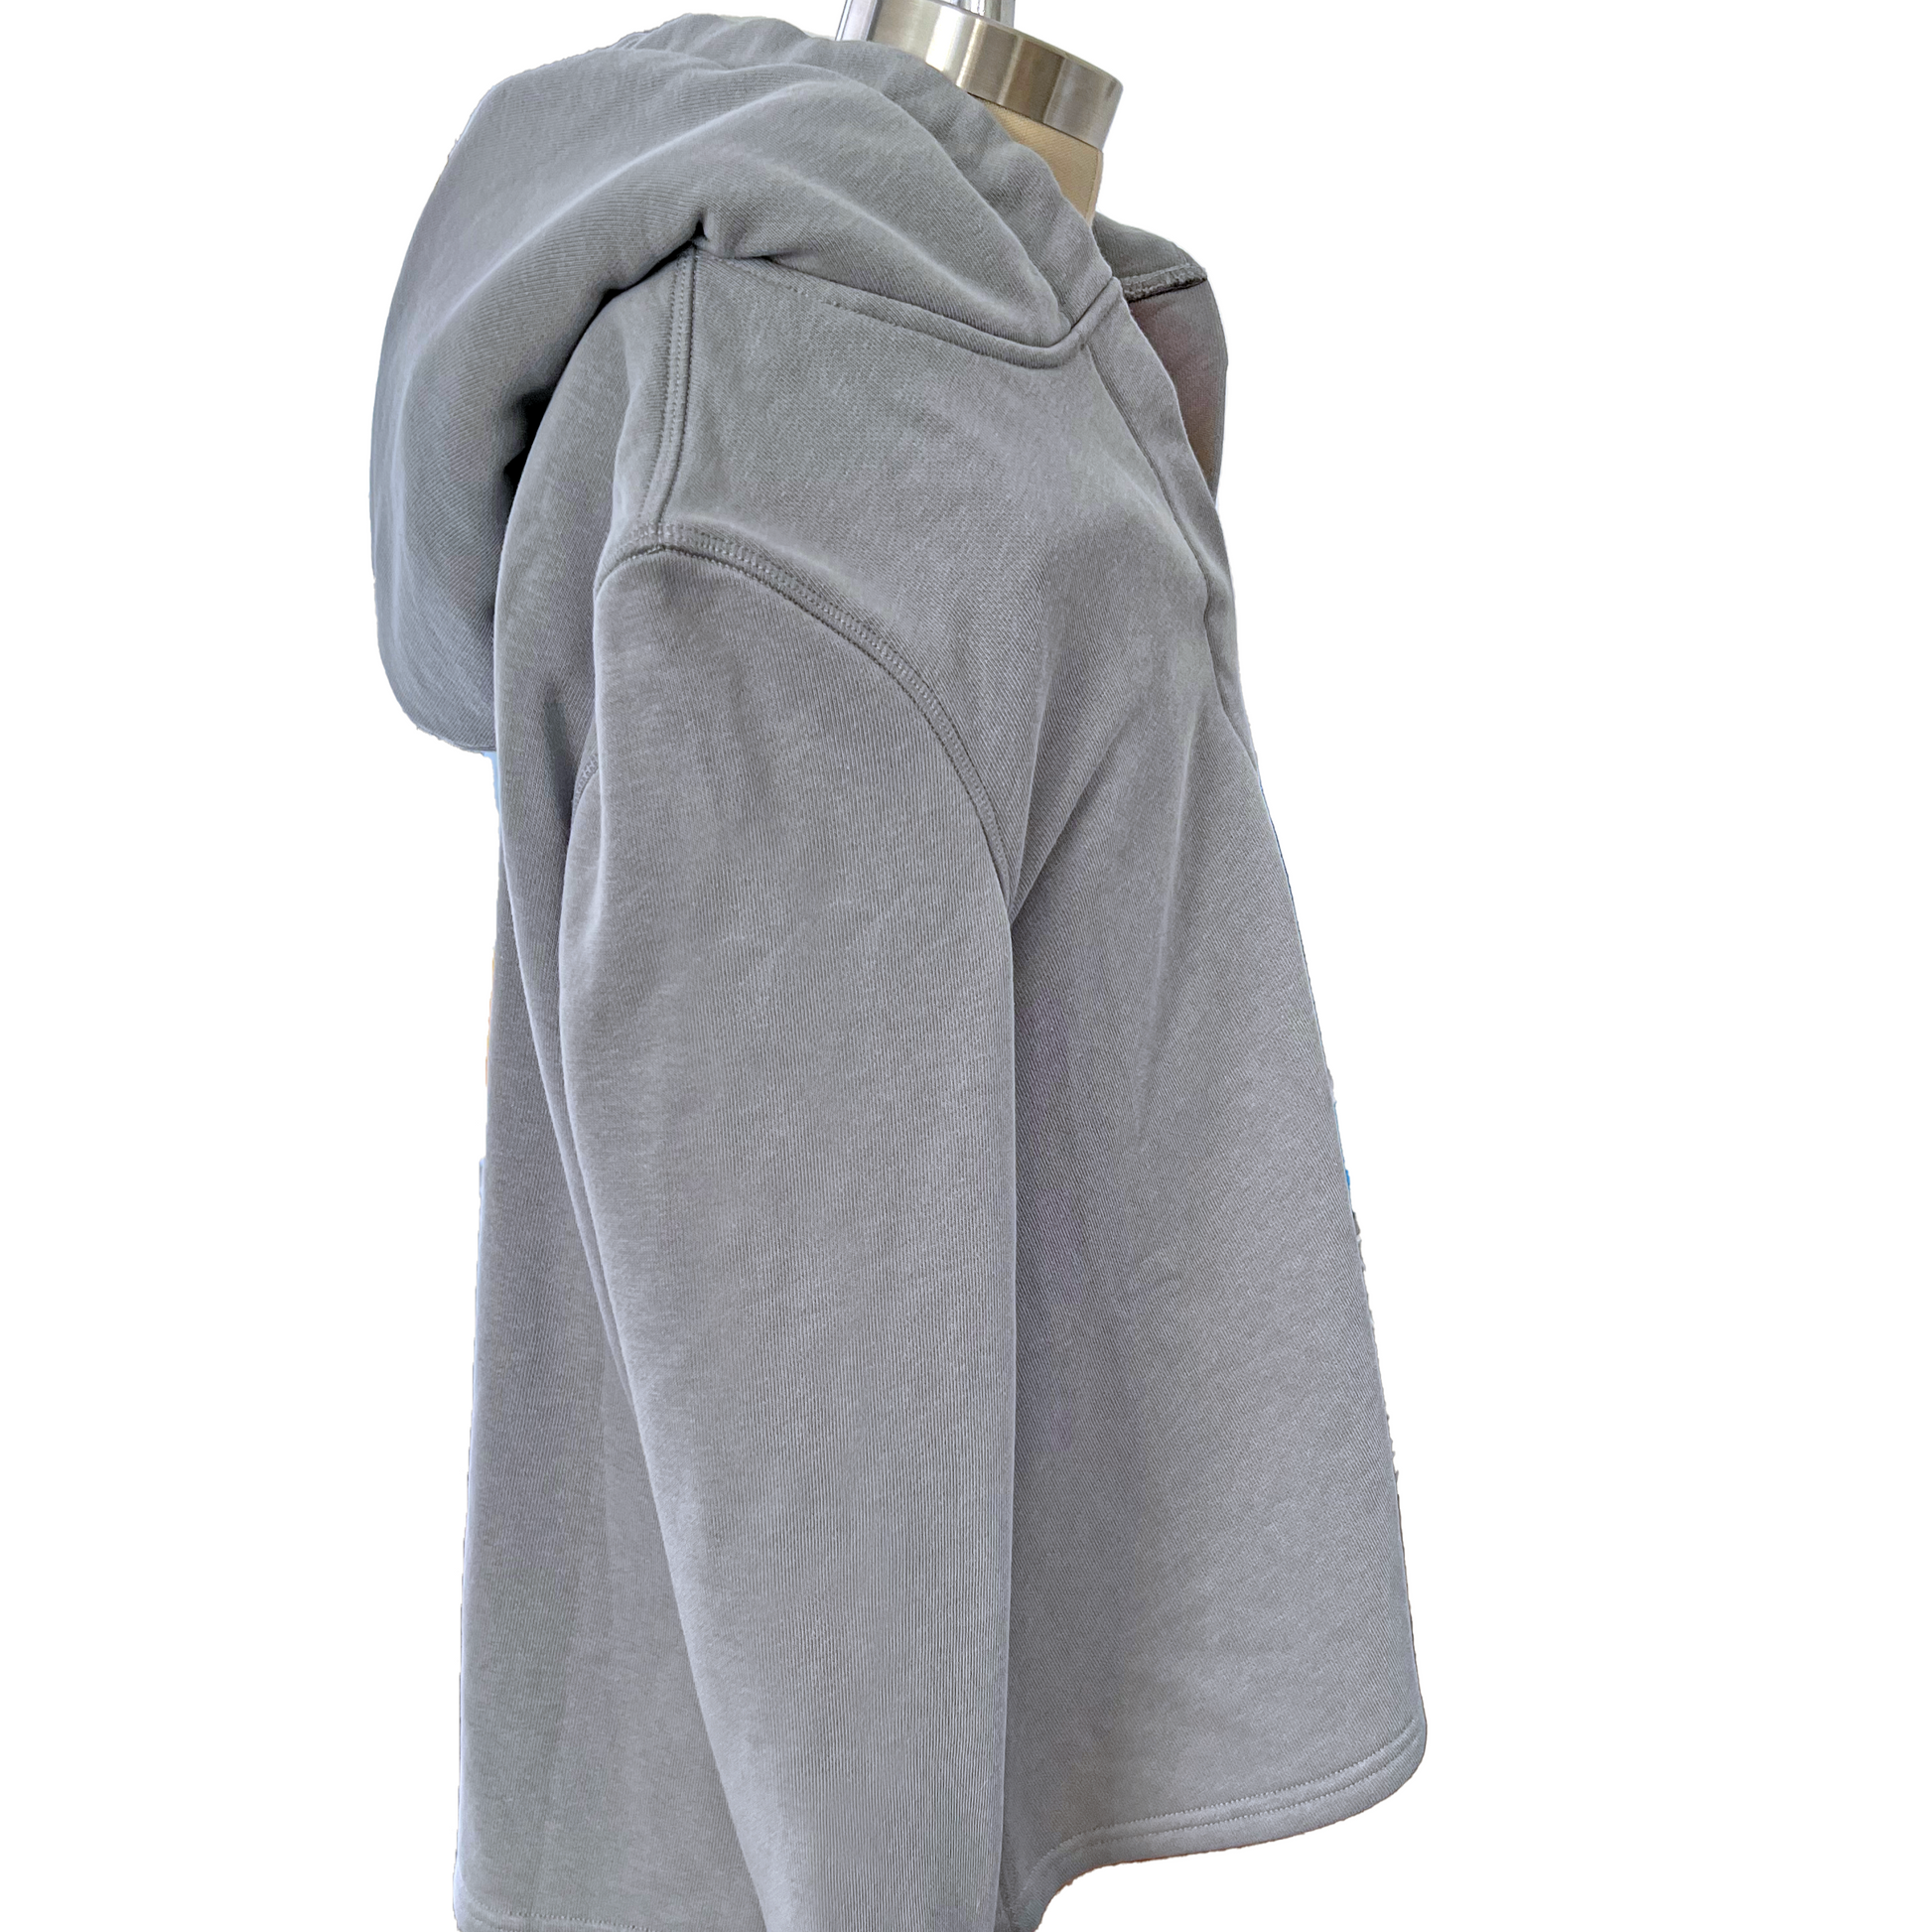 Grey stimuli reducing hoodie with magnetic closures and sound reducing hood.